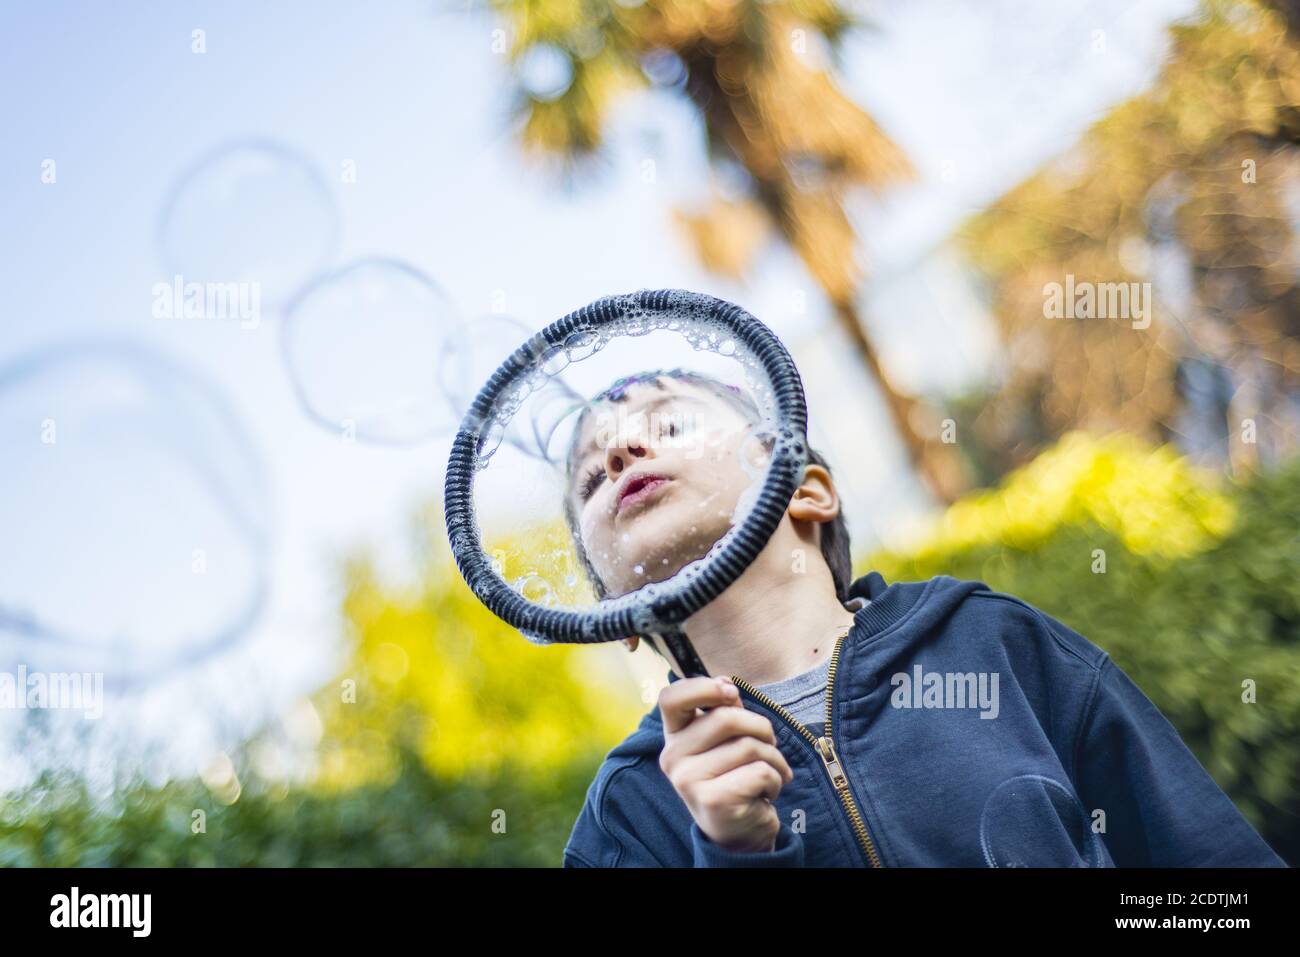 7-year-old child outdoors in the garden in winter makes big soap bubbles Stock Photo